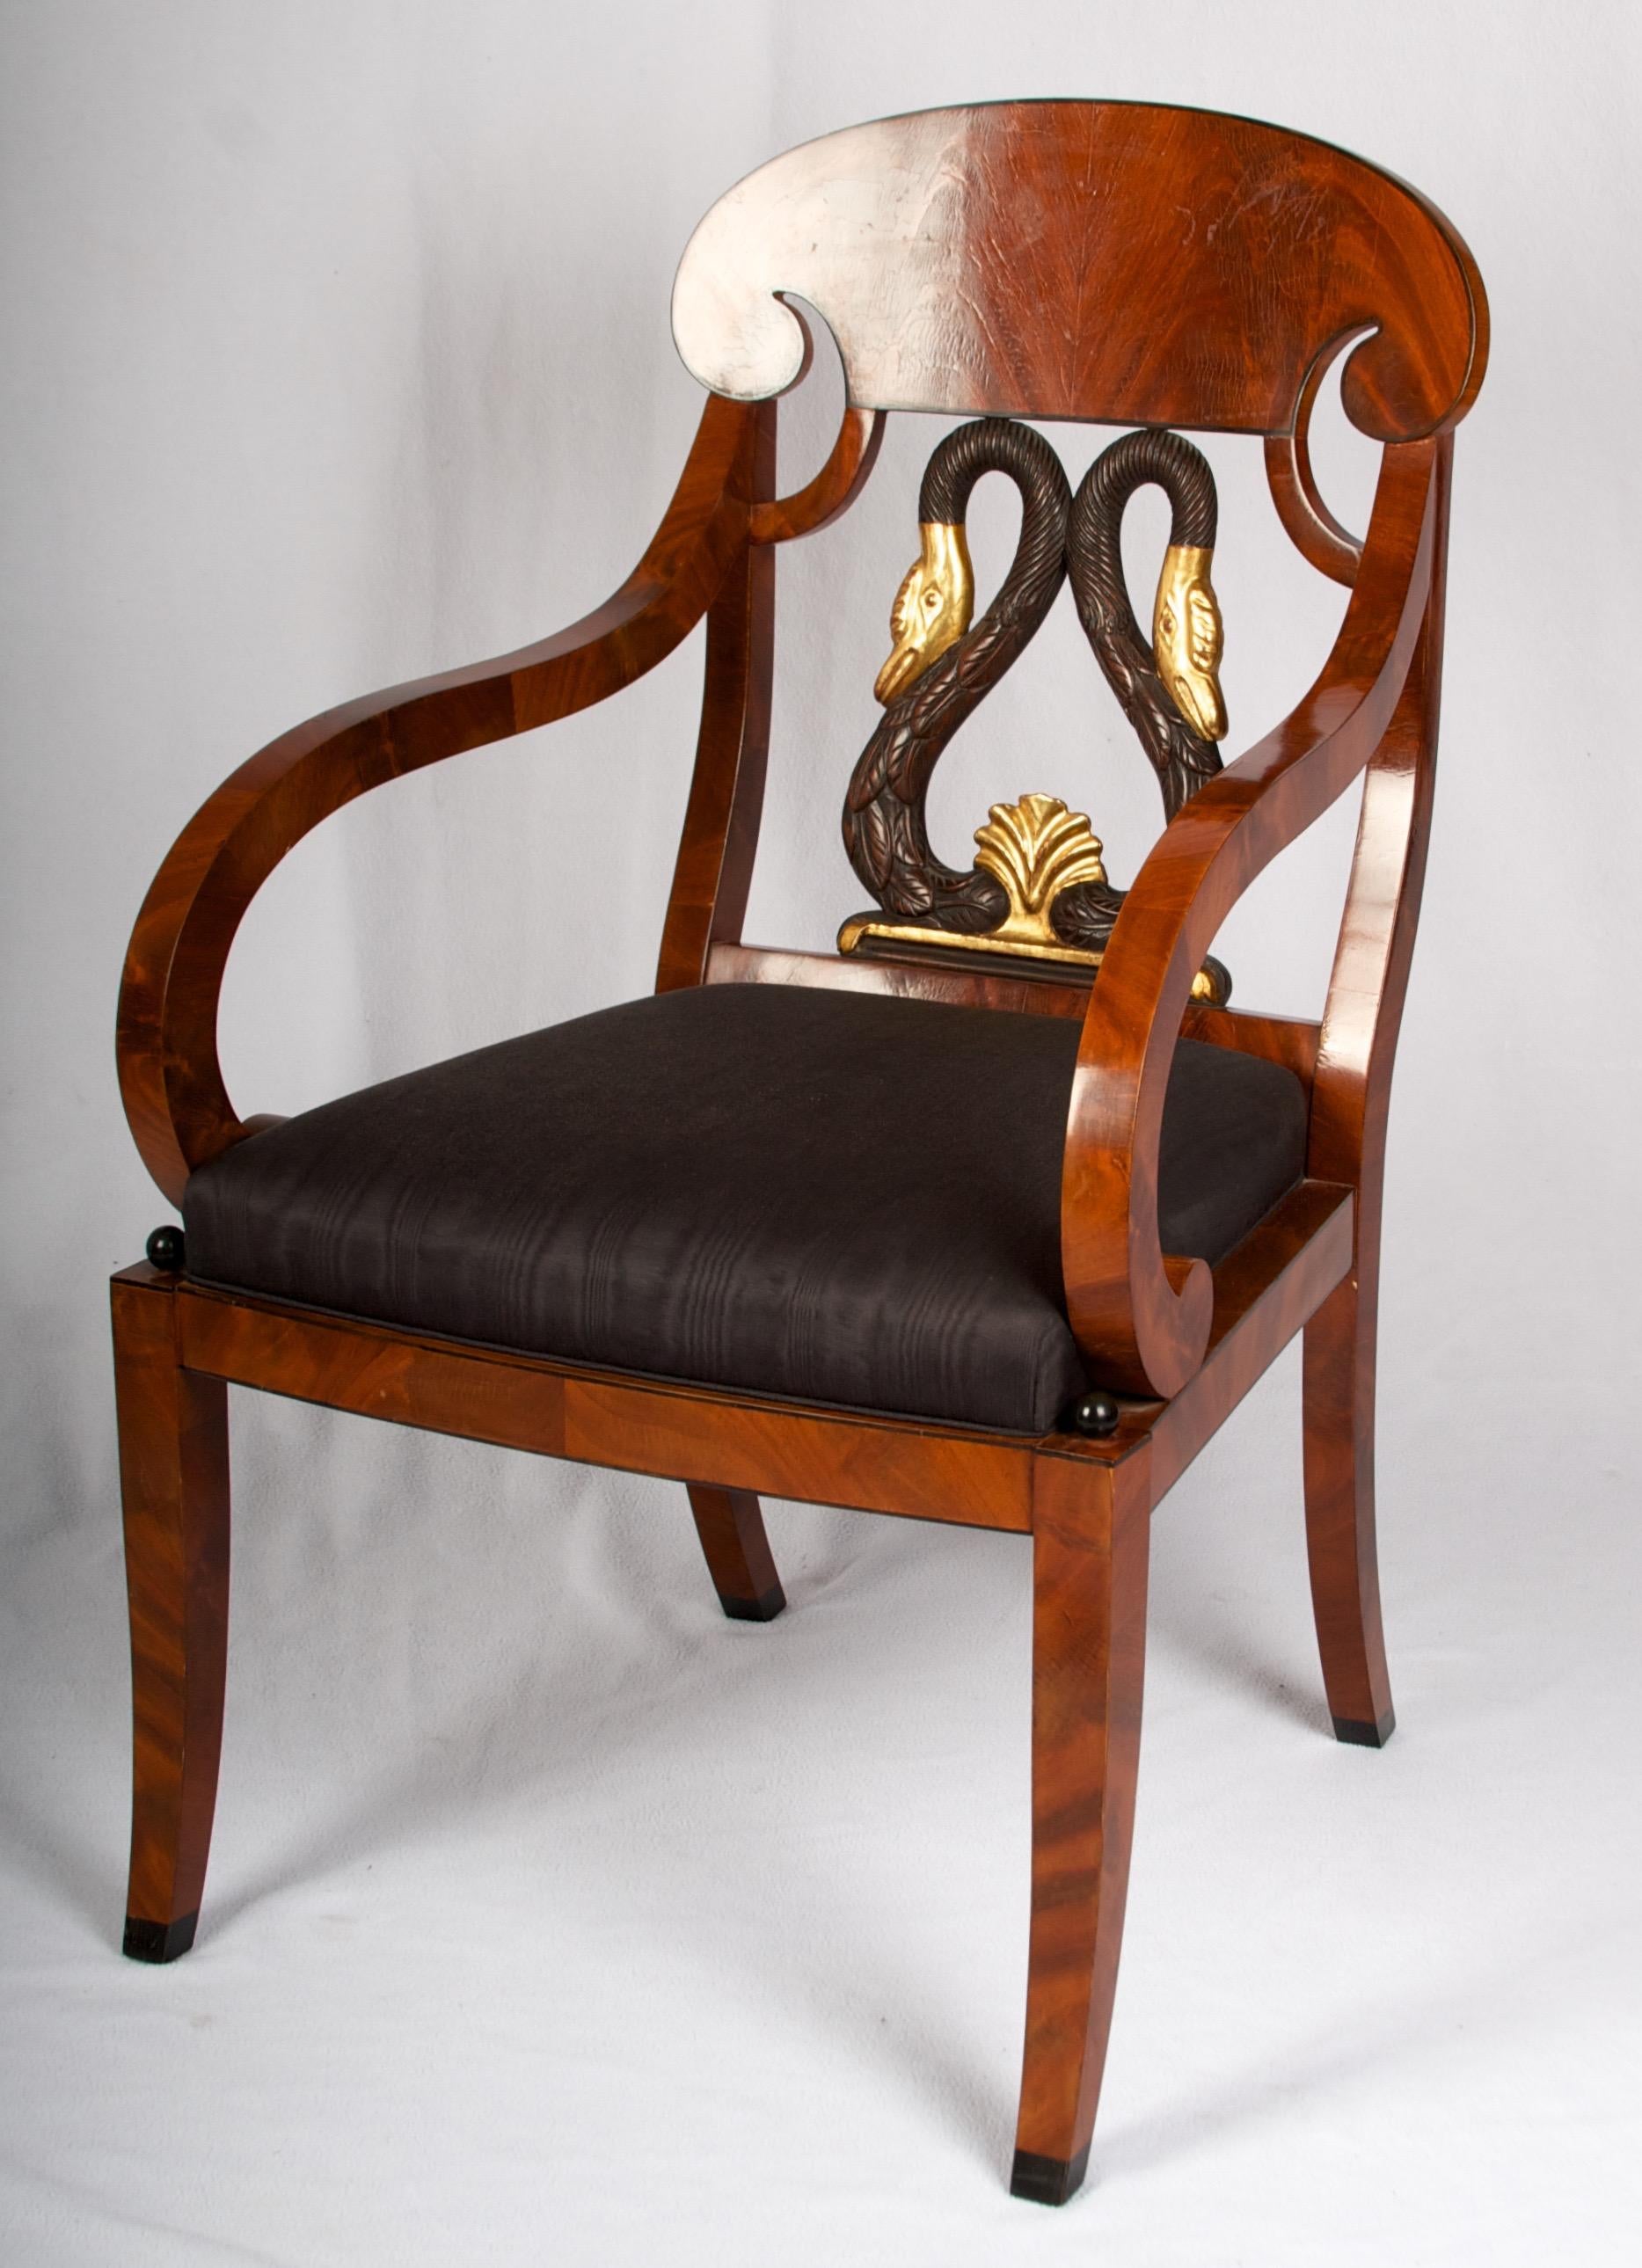 Baltic Russian Biedermeier Style Mahogany Armchair with Gilded Swan Back Detail